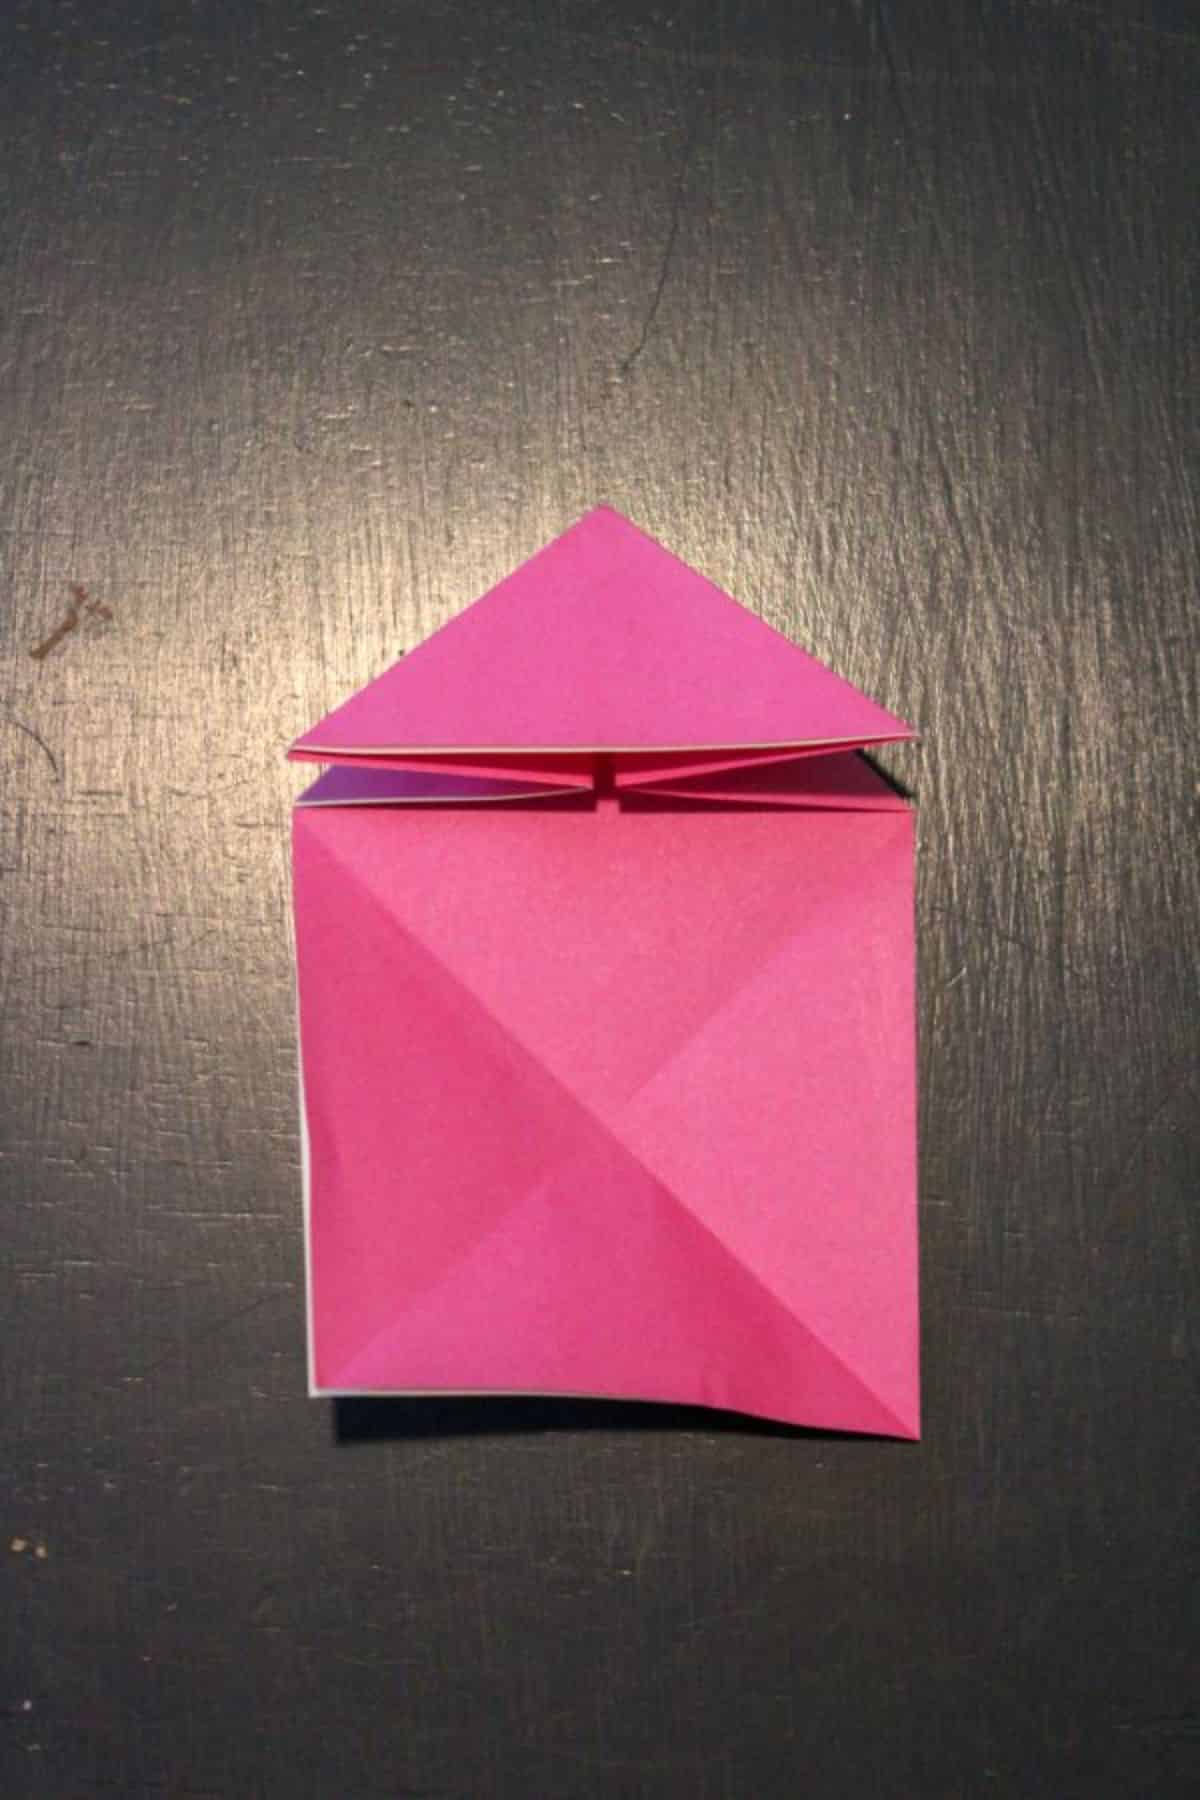 on a black background, the pink origami paper is folded like a little house.